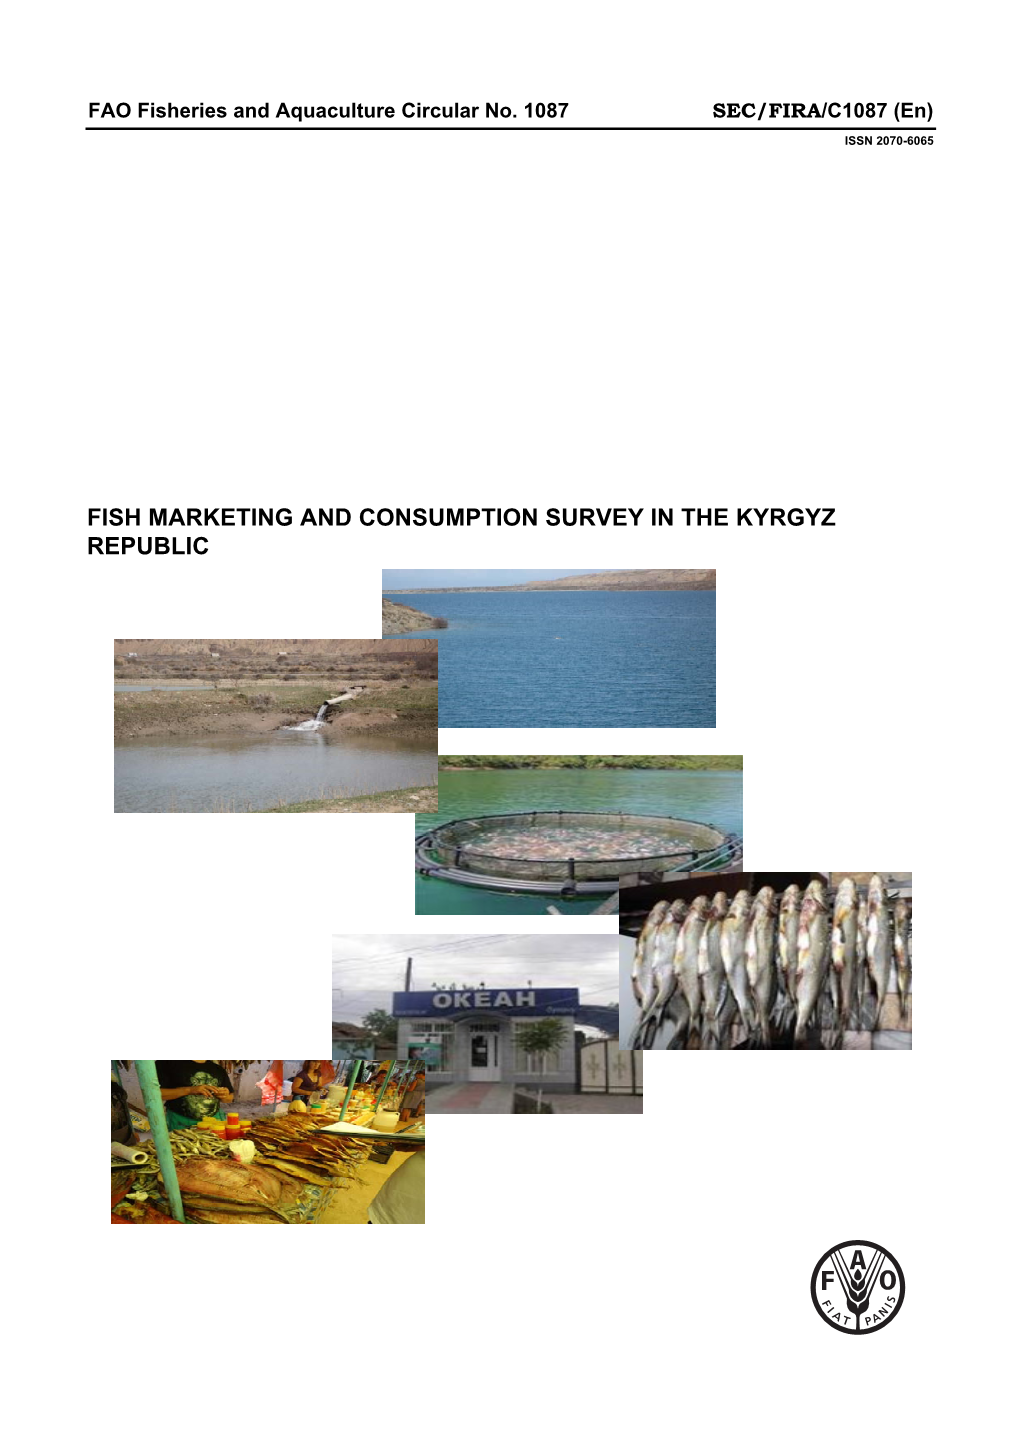 Fish Marketing and Consumption Survey in the Kyrgyz Republic